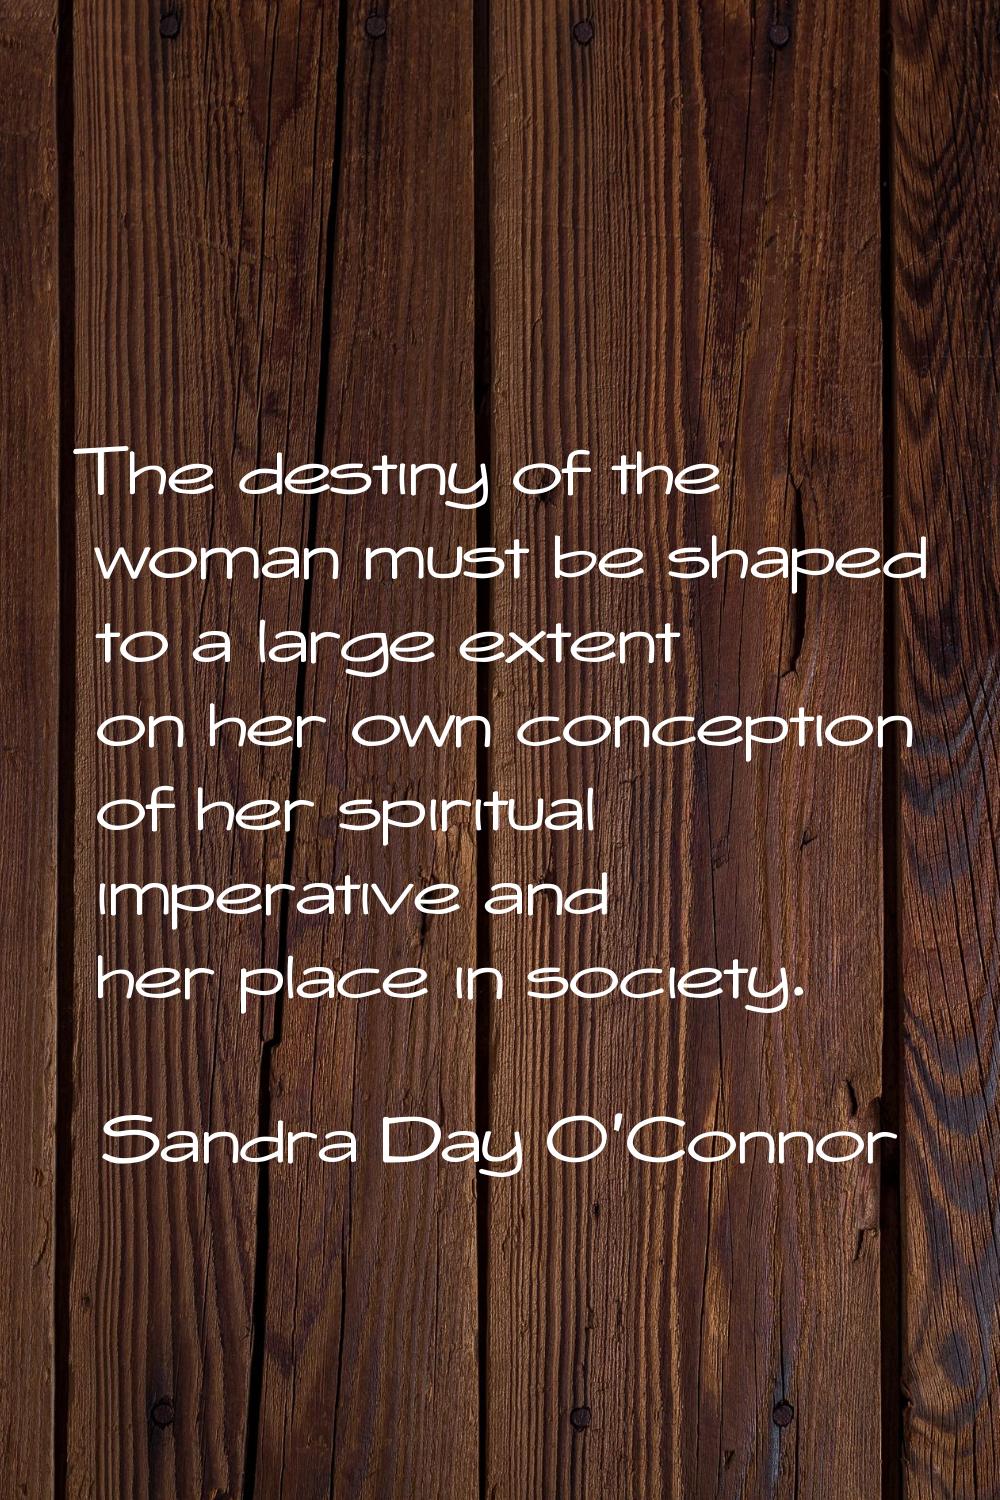 The destiny of the woman must be shaped to a large extent on her own conception of her spiritual im